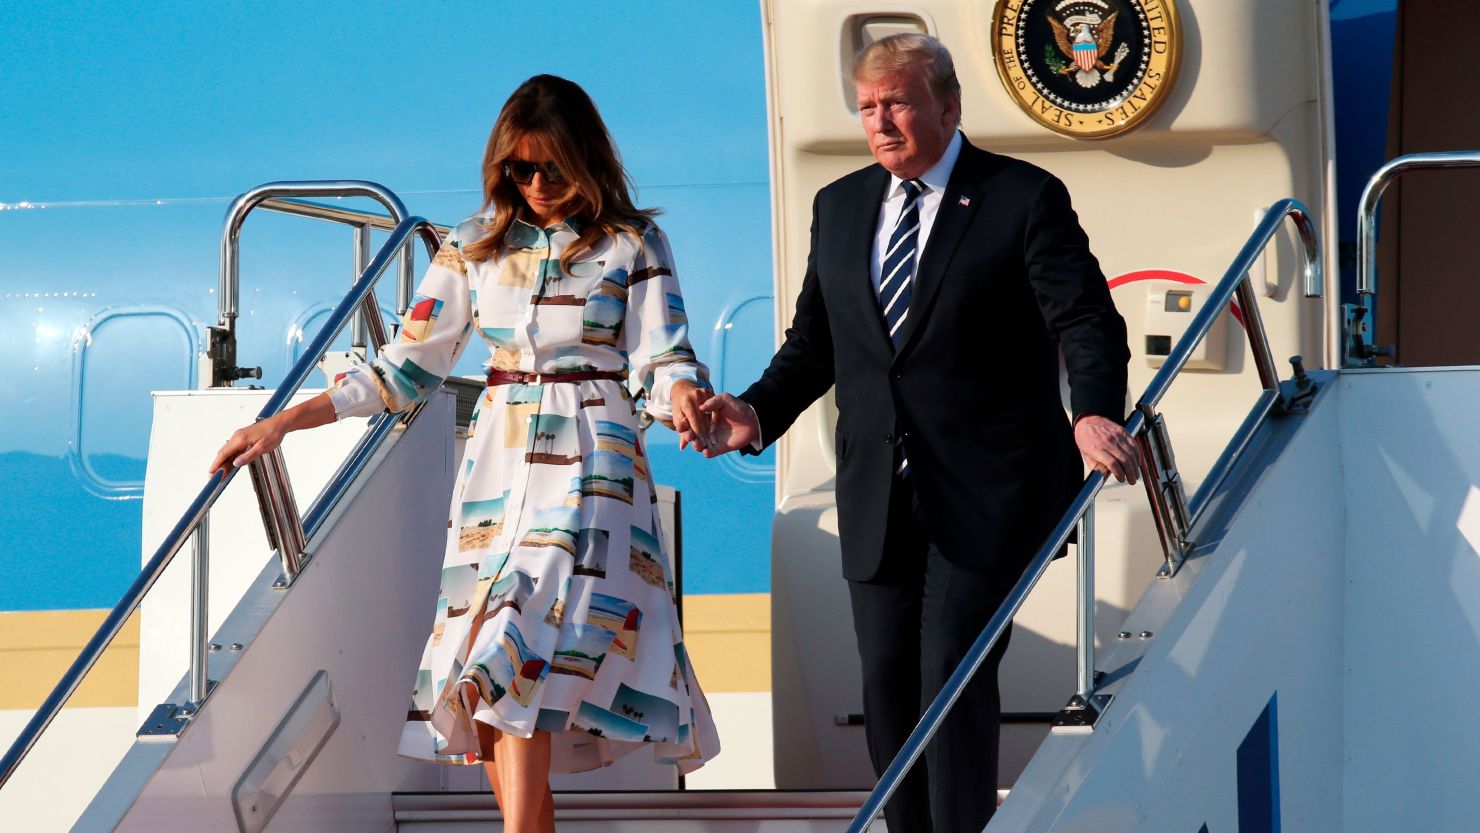 President Trump and First Lady Melania Trump disembark from Air Force One.